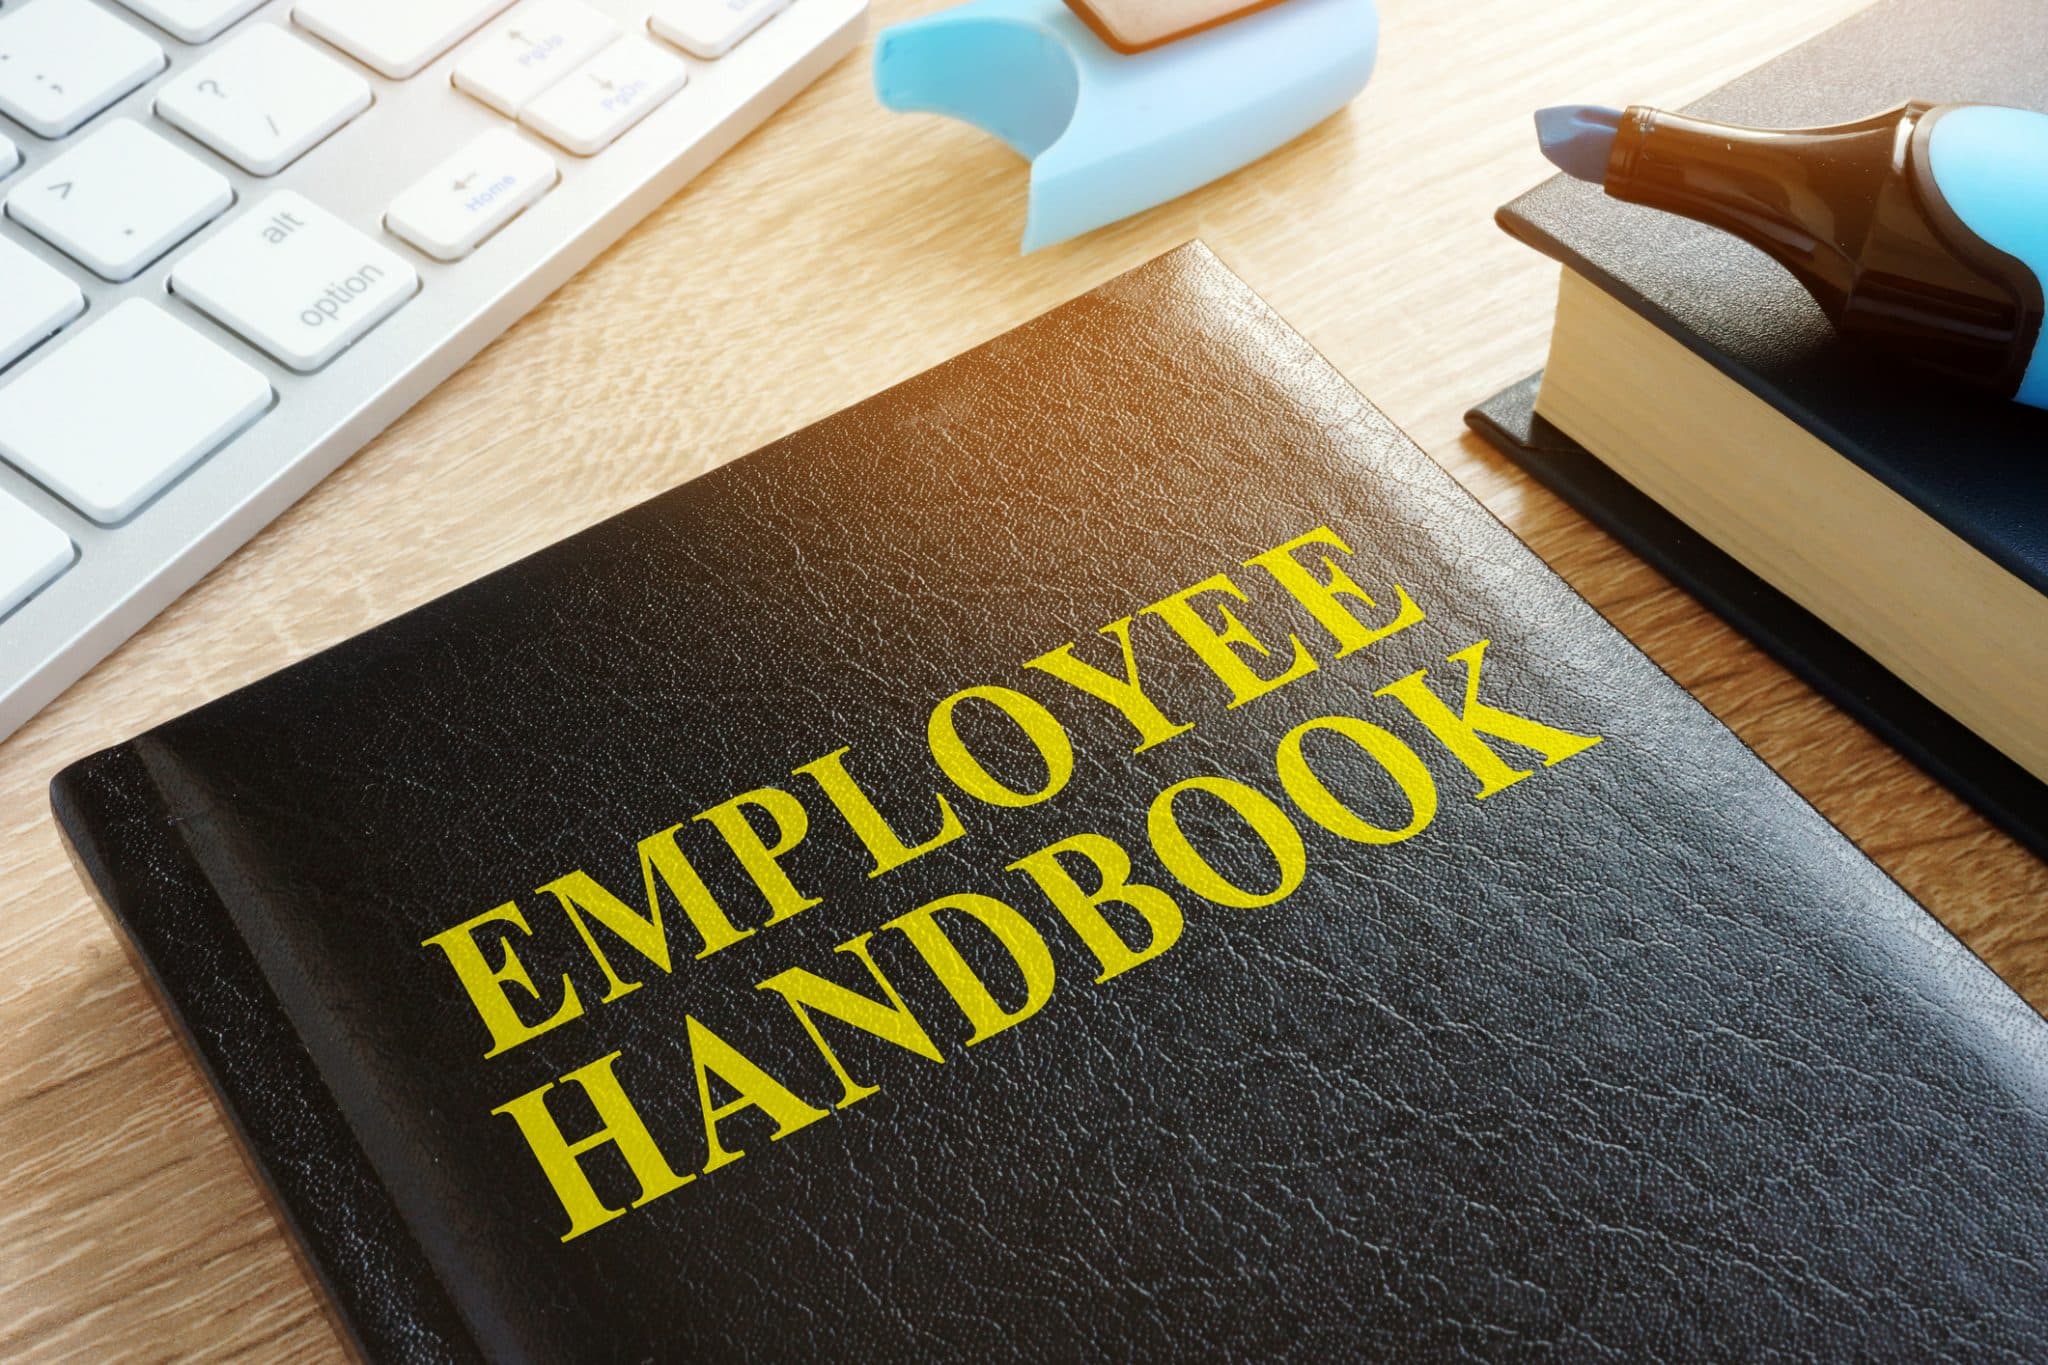 Employee Handbooks are a MustHave for Any Business The HR Team